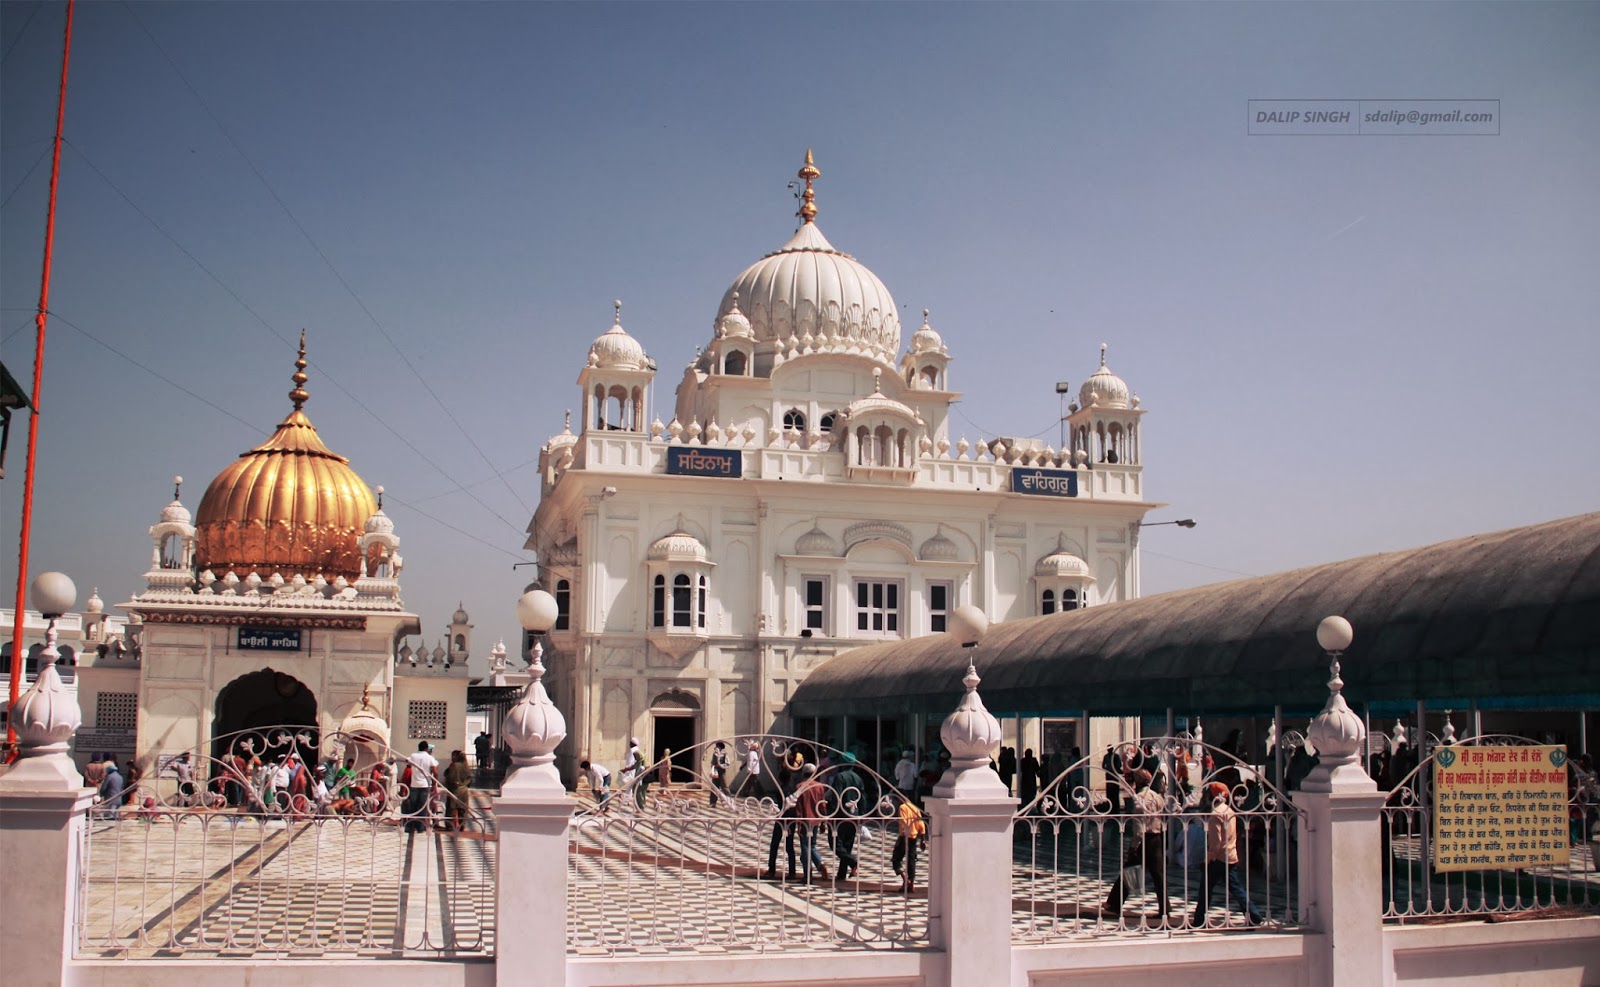 sikh dharmik wallpaper,dome,landmark,dome,place of worship,holy places